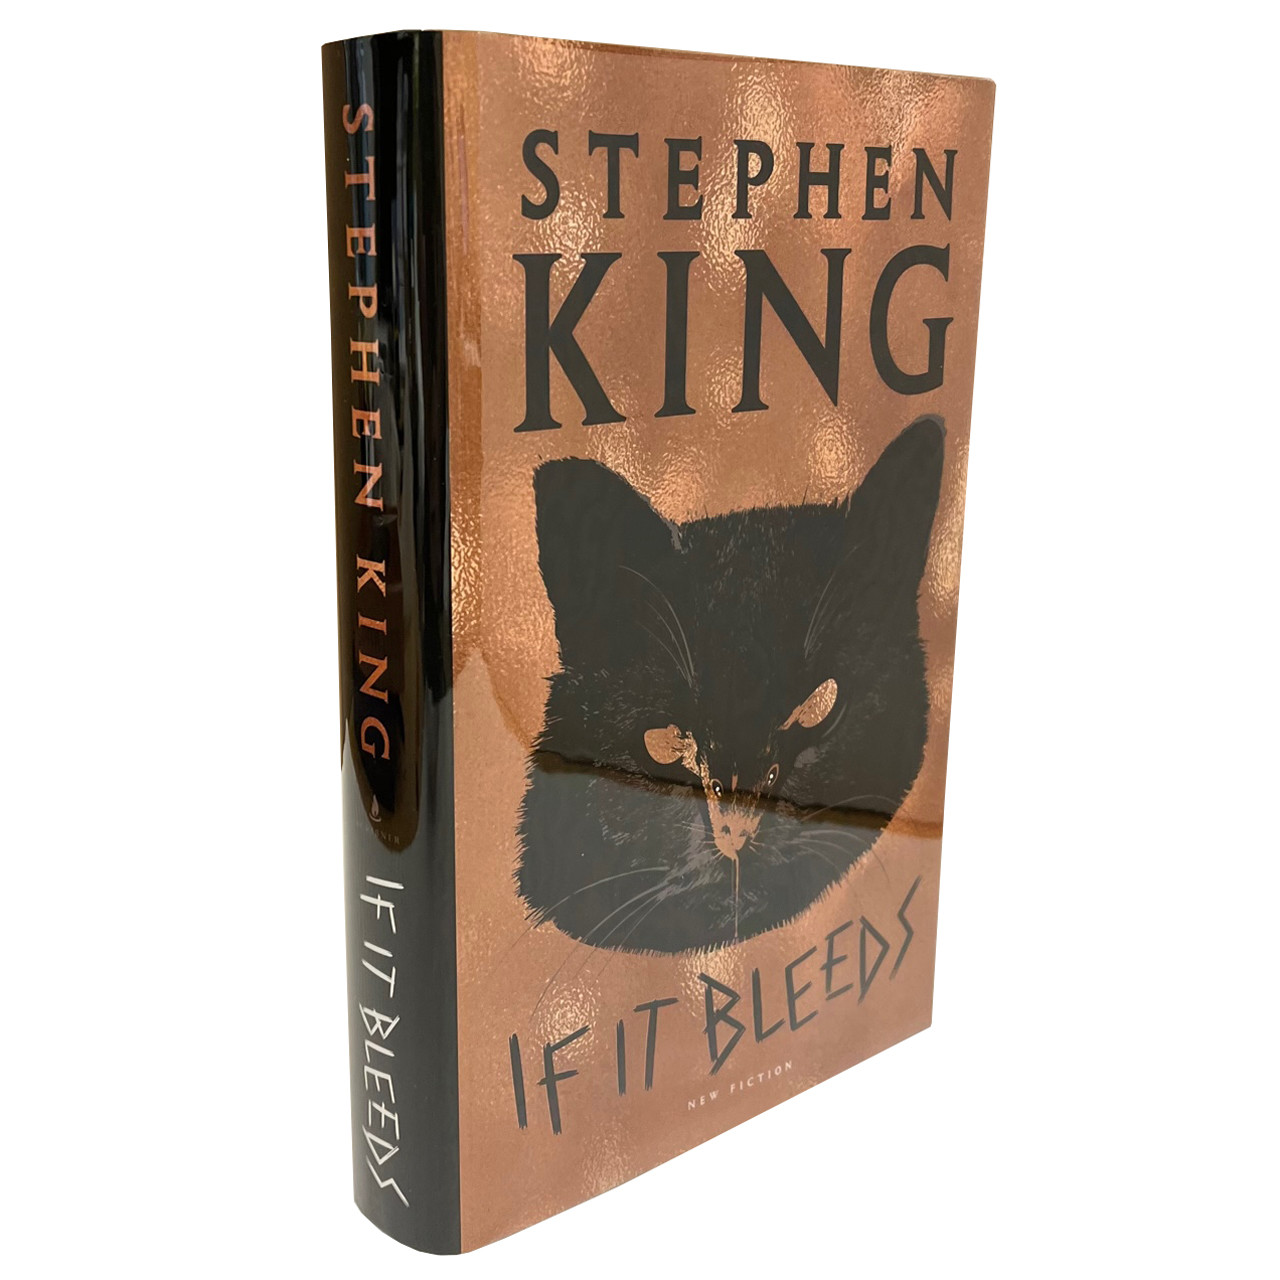 Stephen King "If It Bleeds" Signed First Edition, First Printing of only 350, Slipcased w/COA